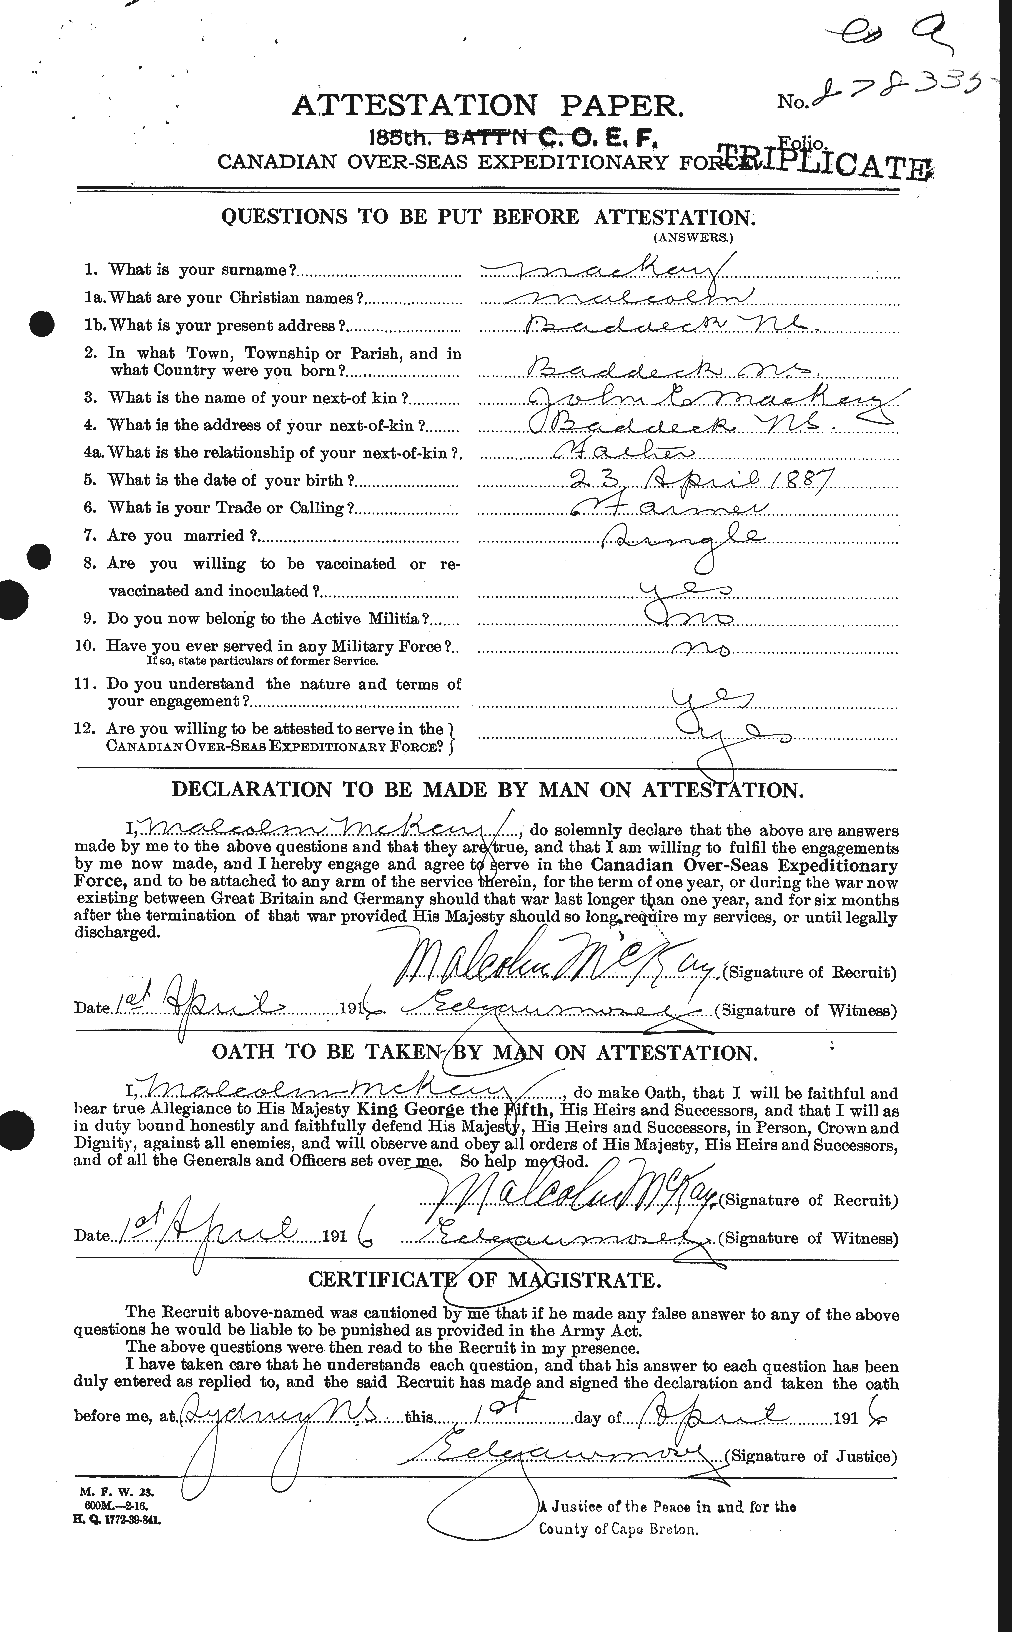 Personnel Records of the First World War - CEF 527163a